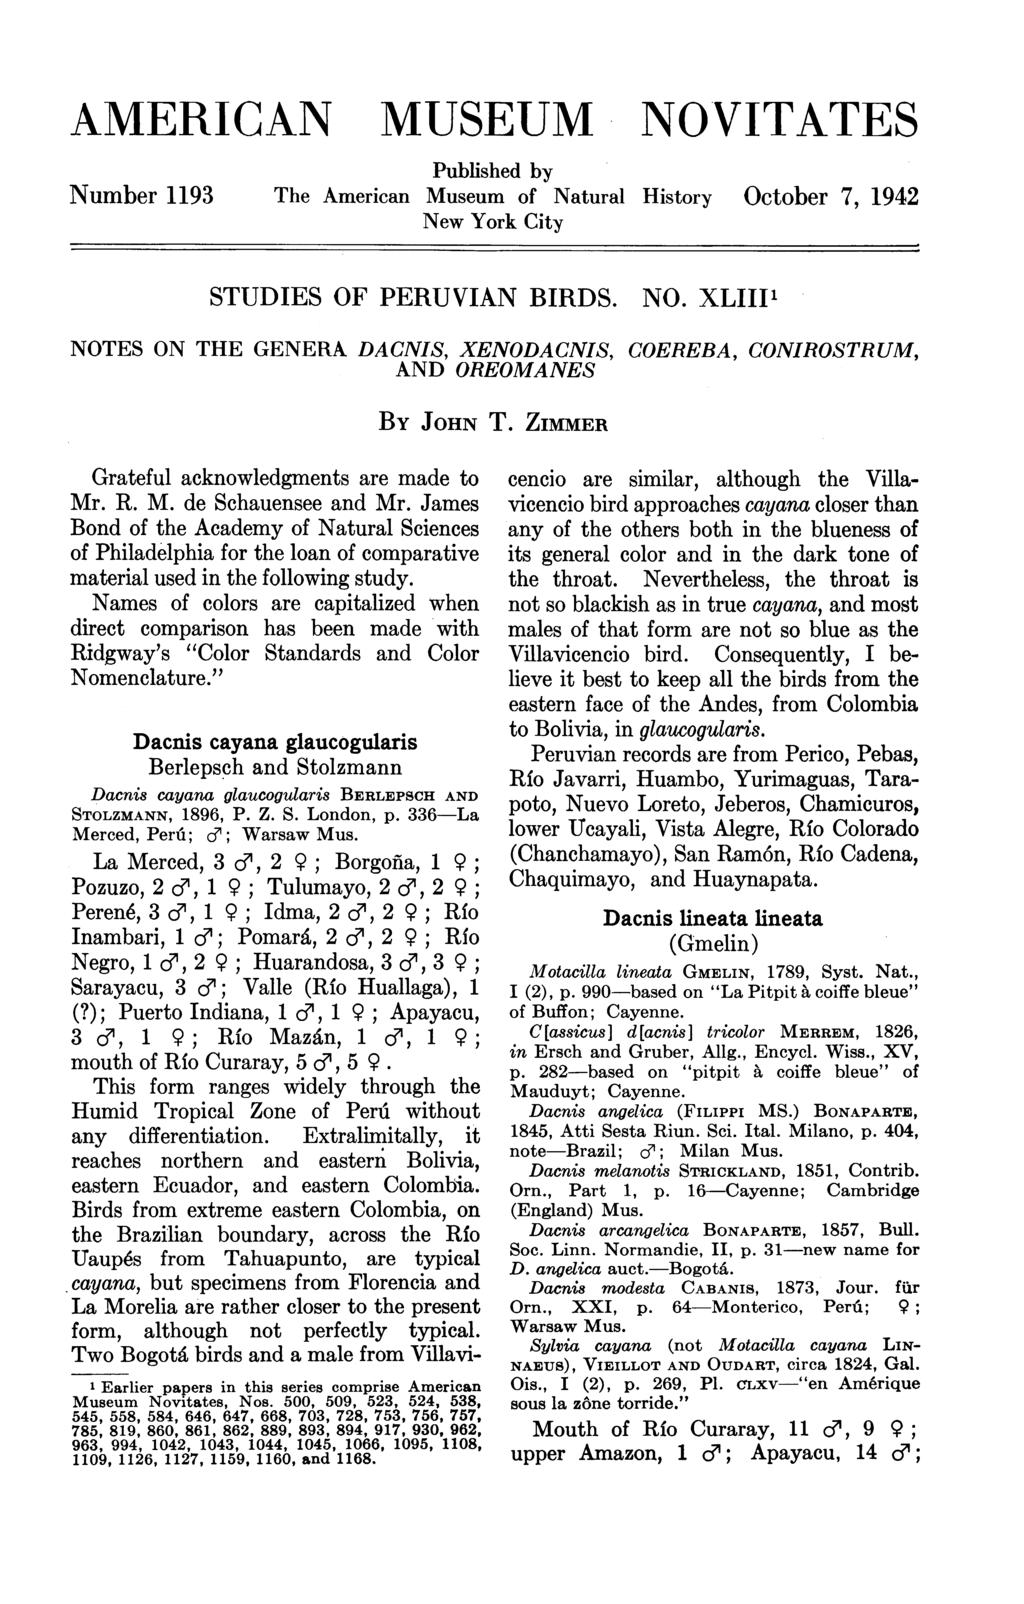 AMERICAN MUSEUM NO'VITATES Number 1193 Published by The American Museum of Natural History October 7, 1942 New York City STUDIES OF PERUVIAN BIRDS. NO. XLIII' NOTES ON THE GENERA DACNIS, XENODACNIS, COEREBA, CONIROSTRUM, AND OREOMANES BY JOHN T.